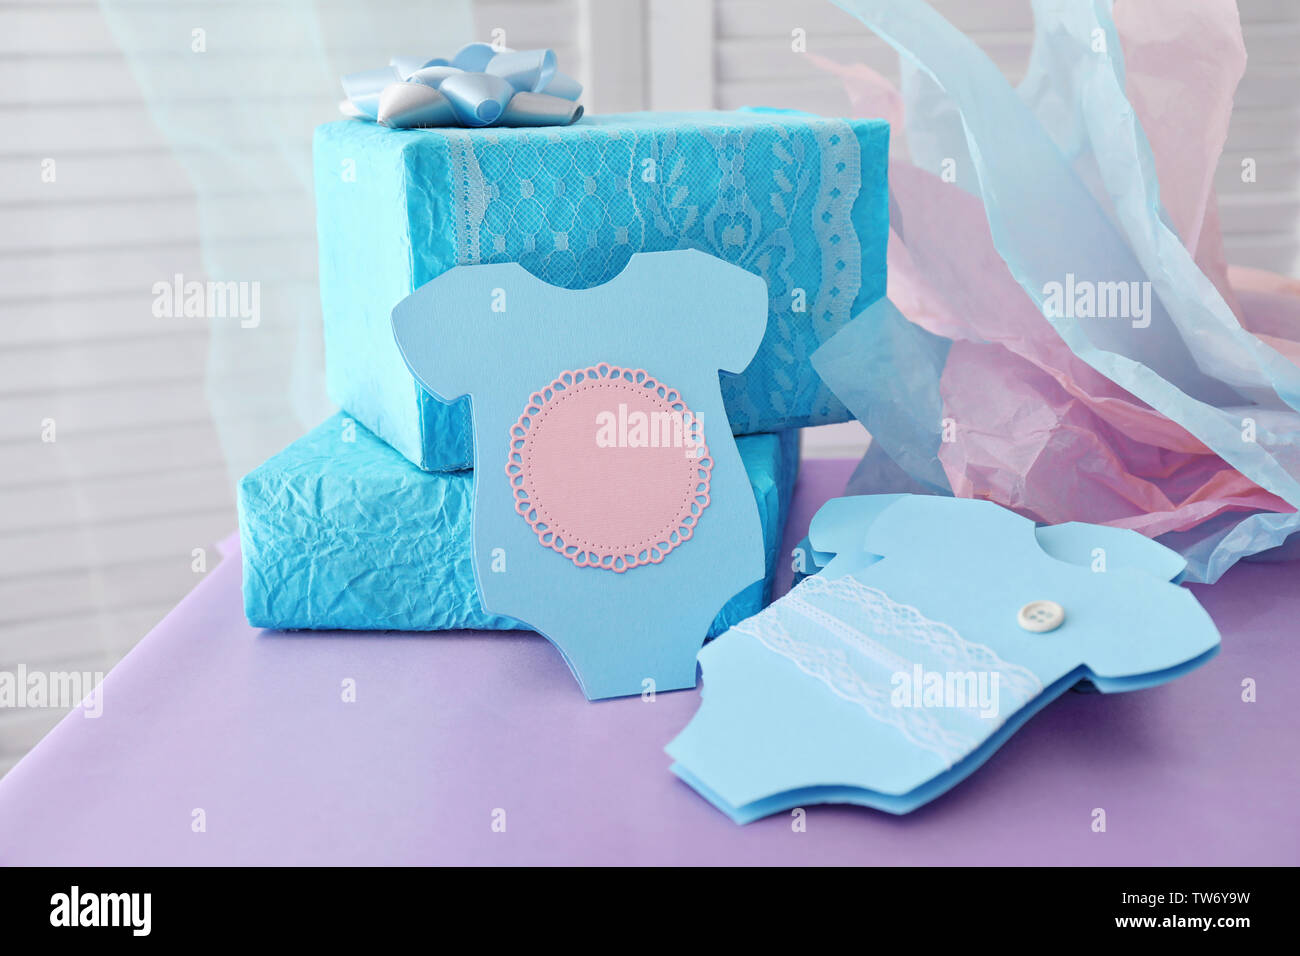 baby-shower-thank-you-cards-and-gifts-on-table-stock-photo-alamy